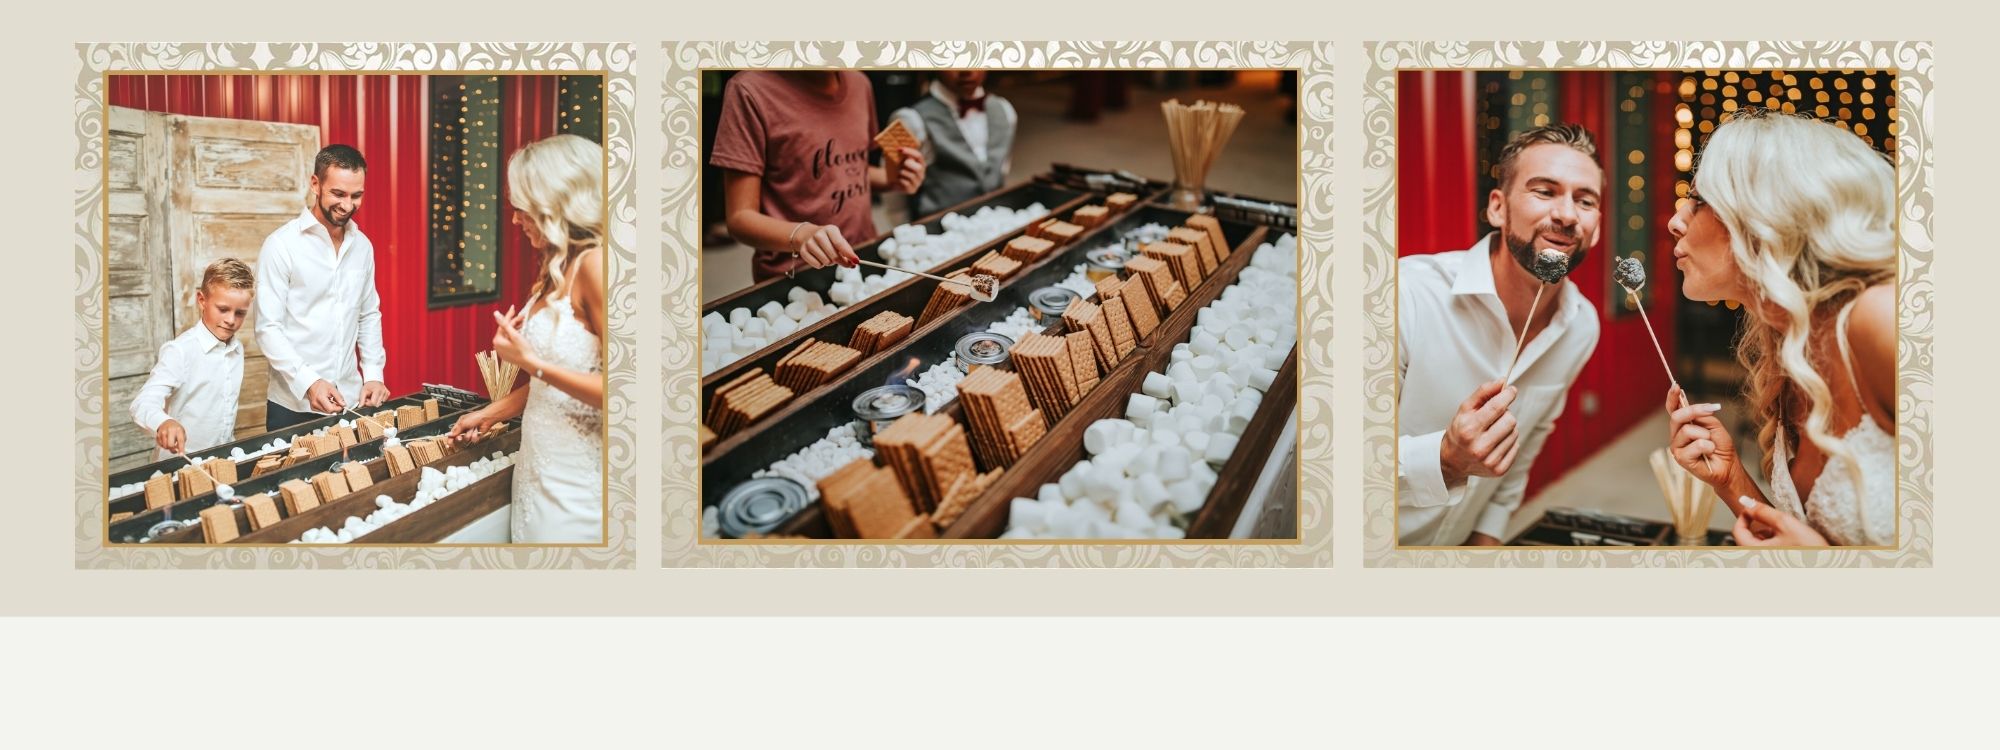 S'mores Bar collage